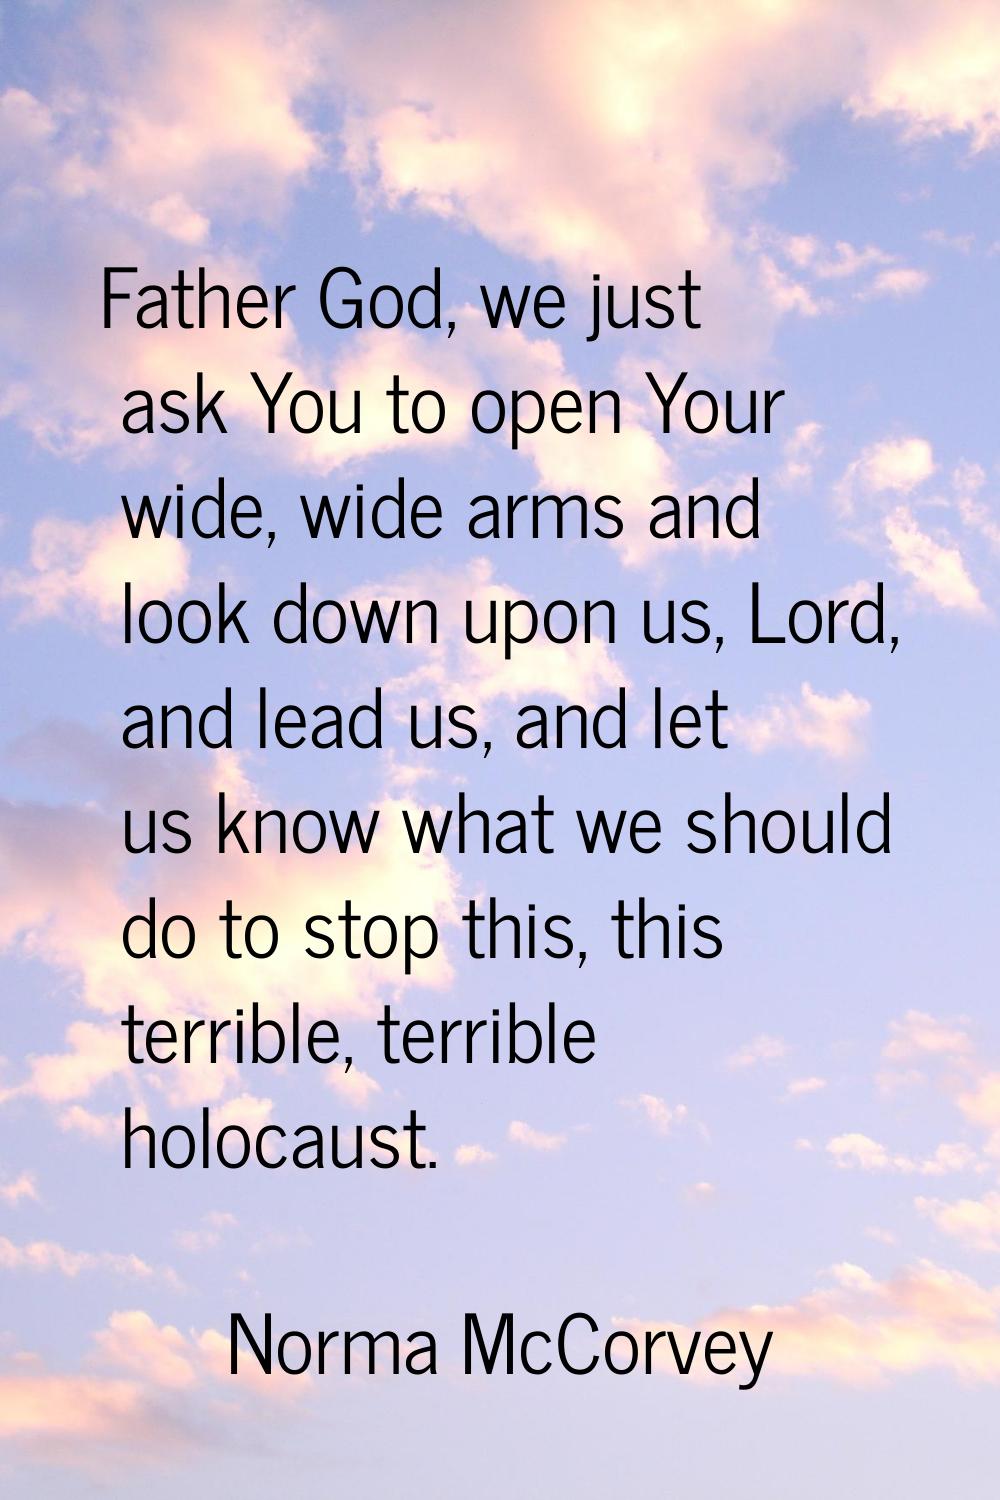 Father God, we just ask You to open Your wide, wide arms and look down upon us, Lord, and lead us, 